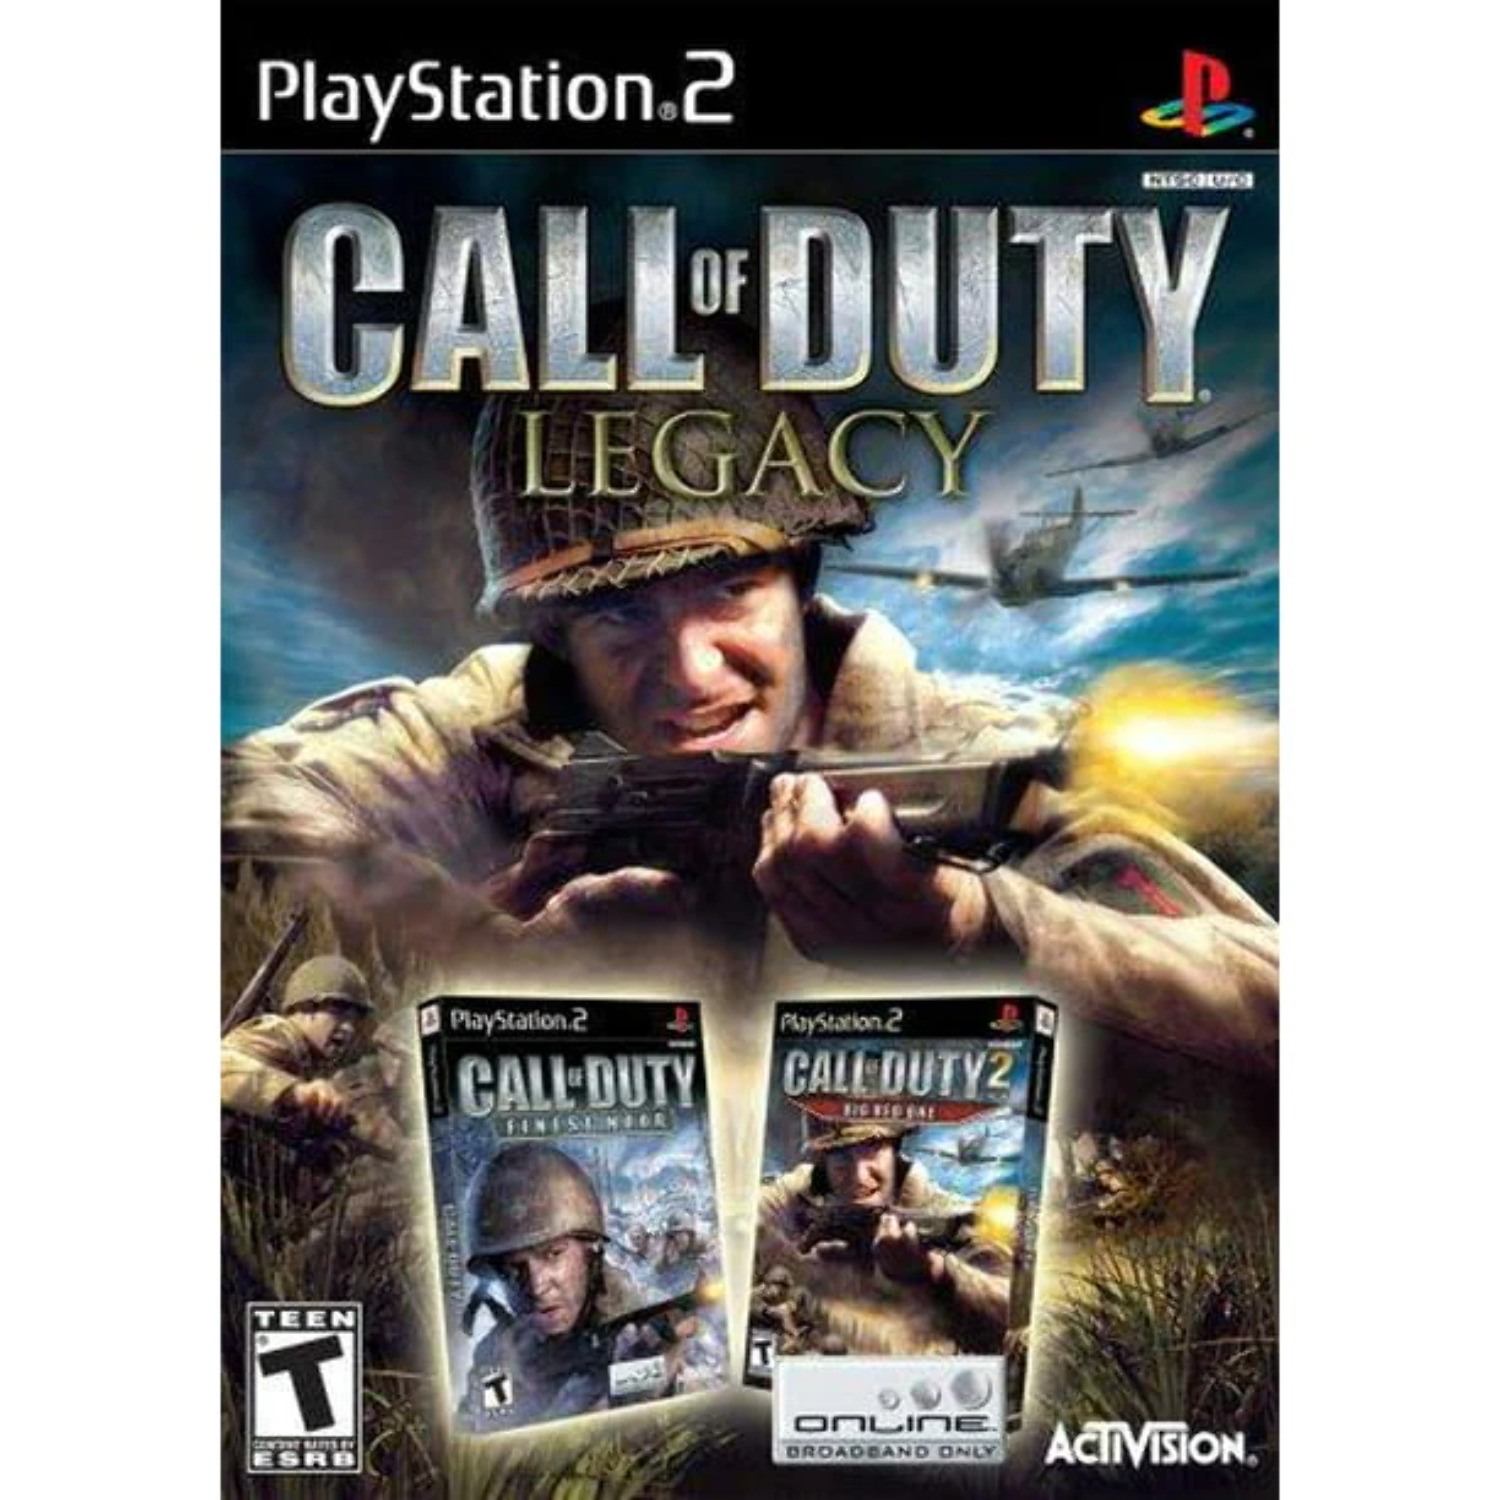 Call of Duty: Legacy - PS2 - image 1 of 1